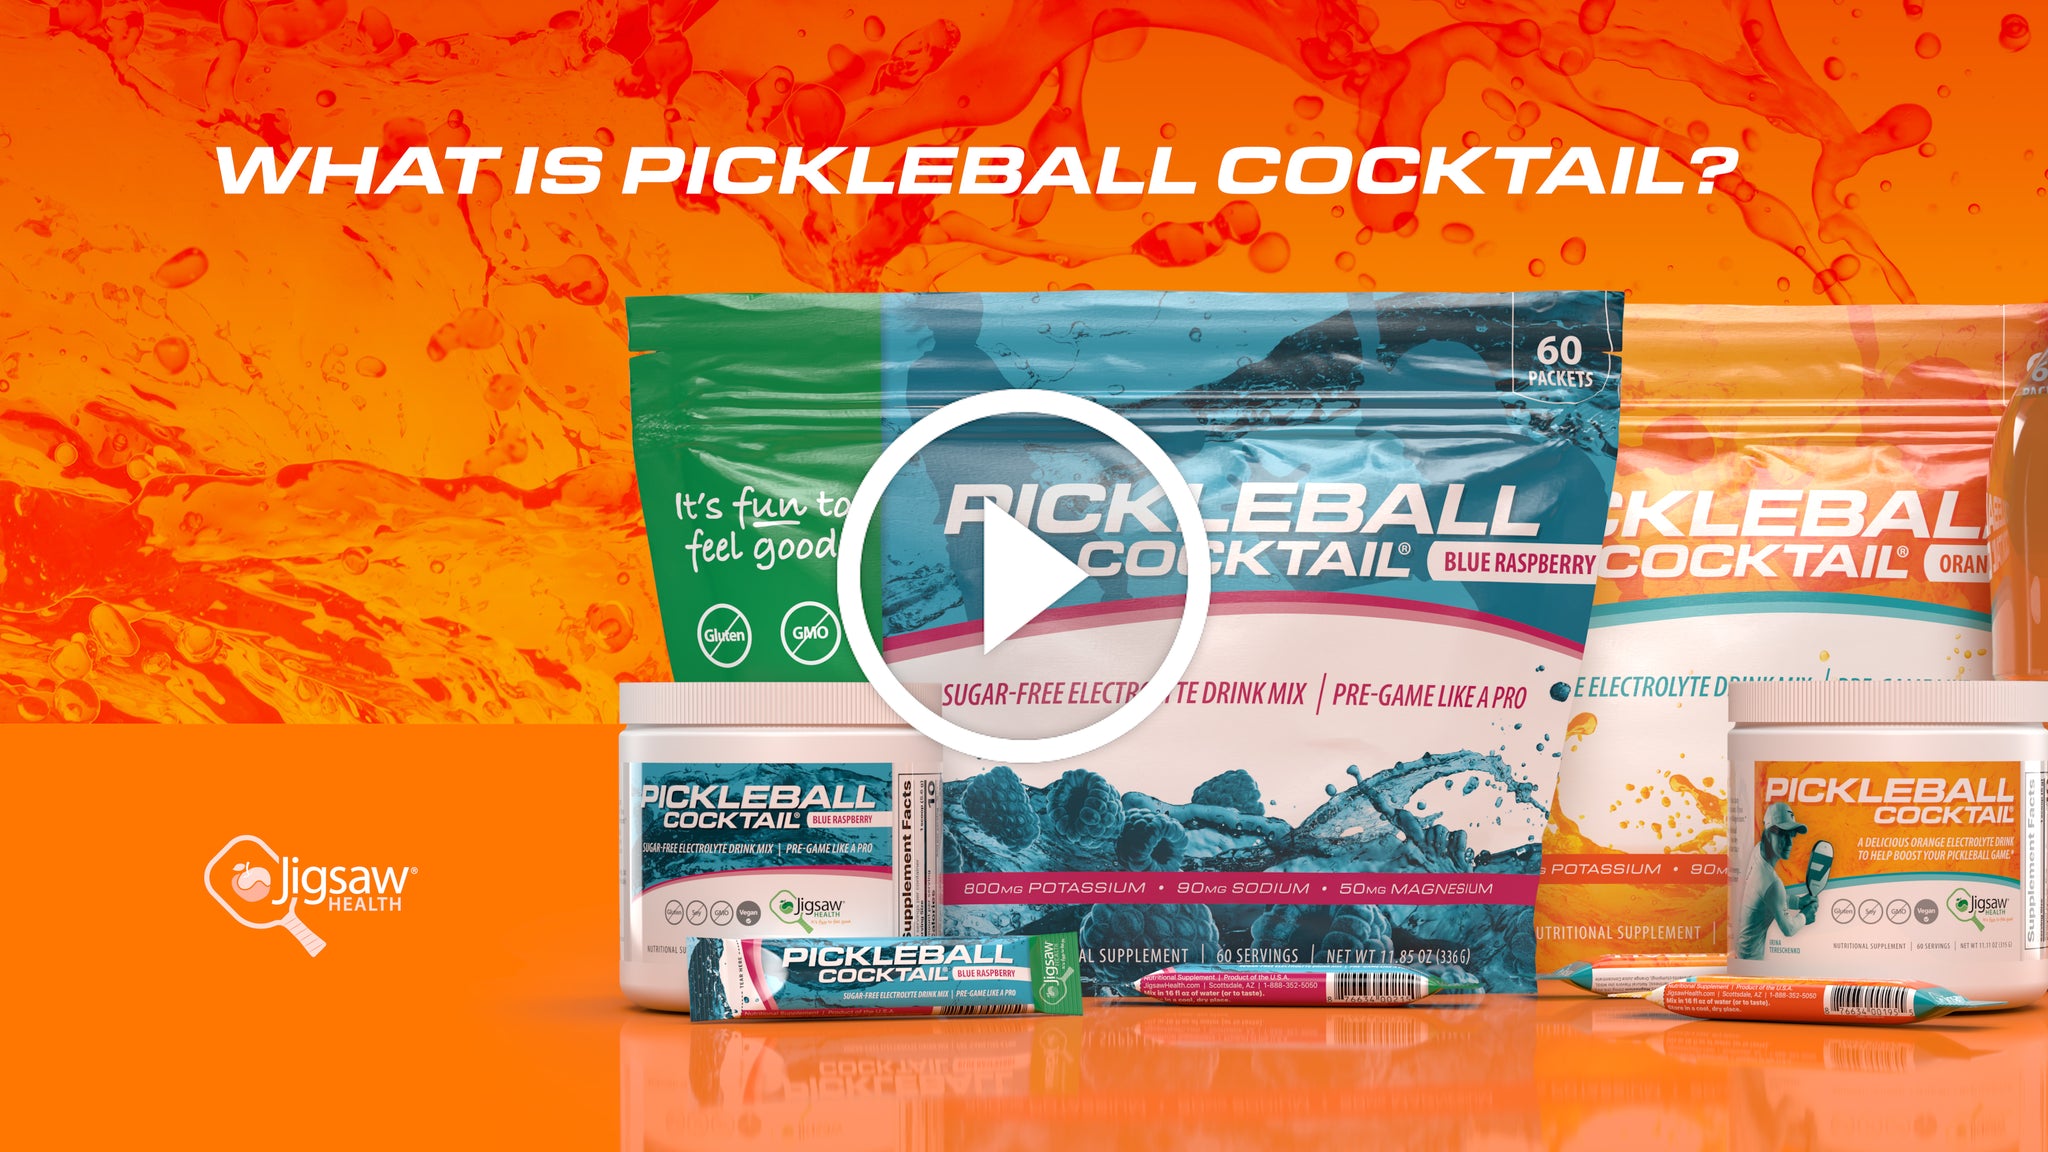 What is Pickleball Cocktail?